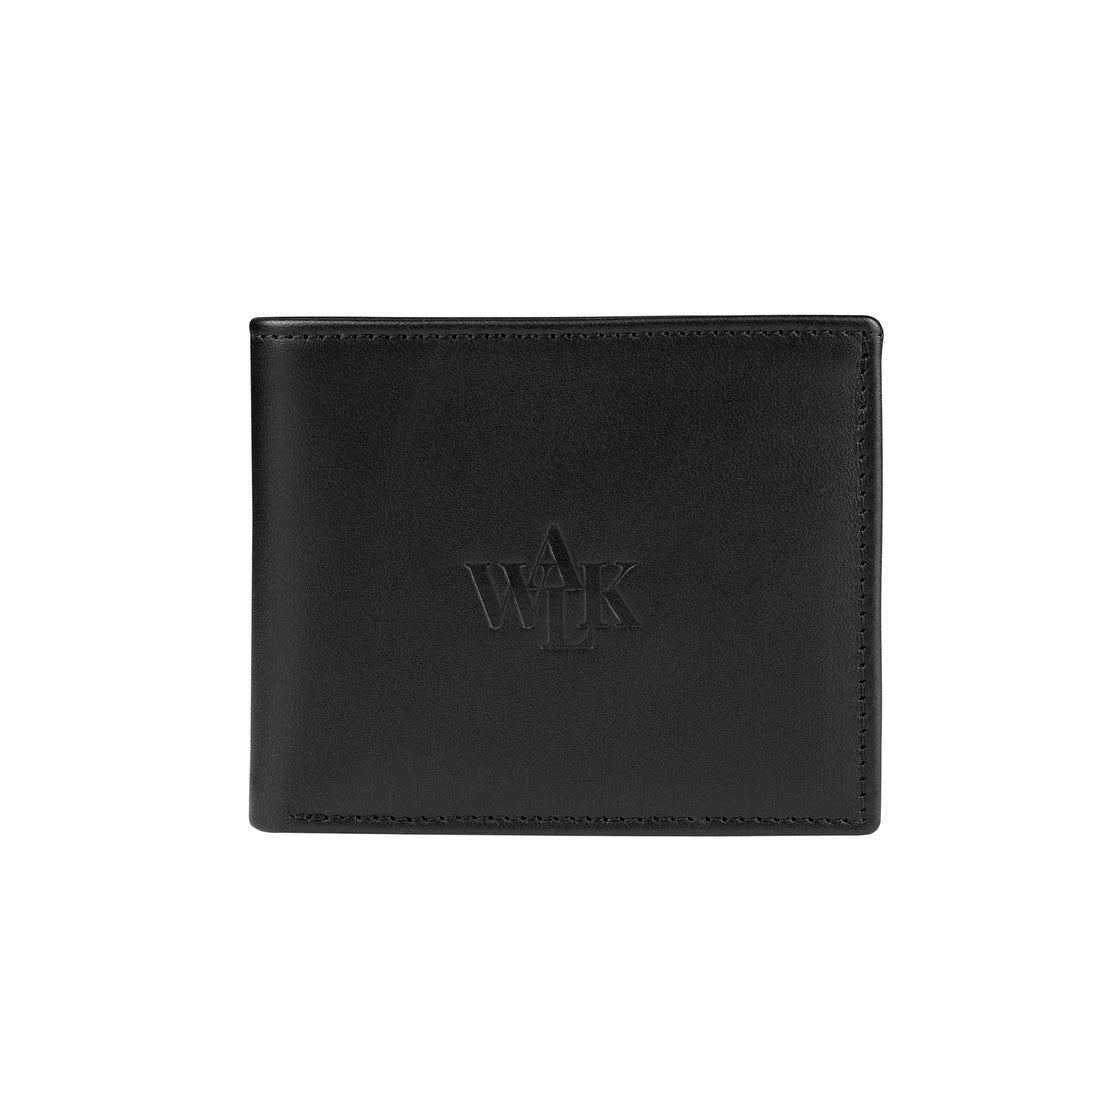 THE BLACK WALLET